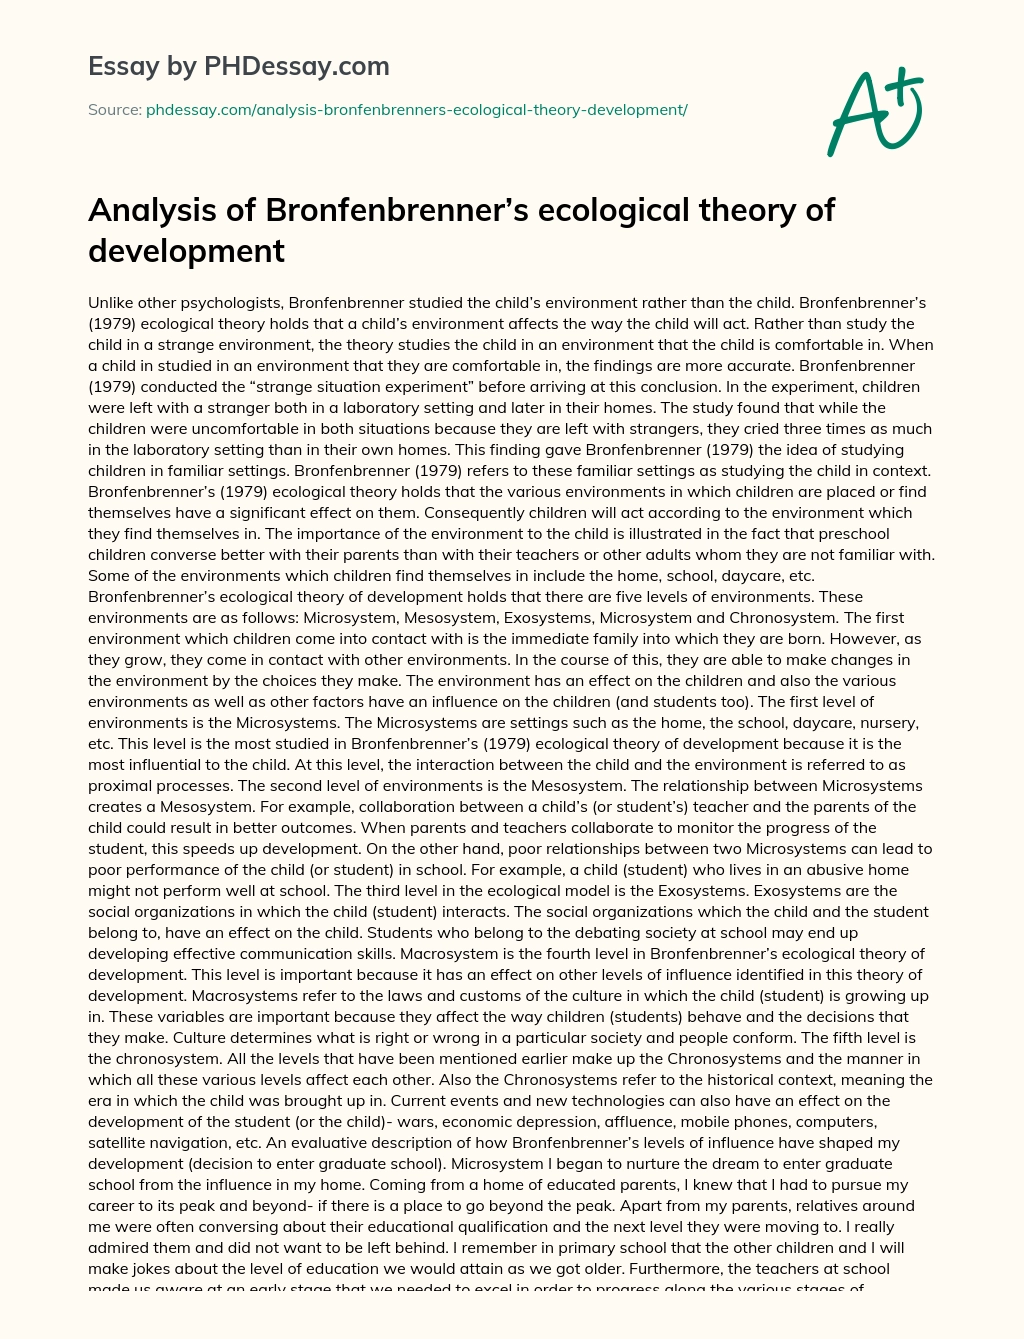 Analysis of Bronfenbrenner’s ecological theory of development essay